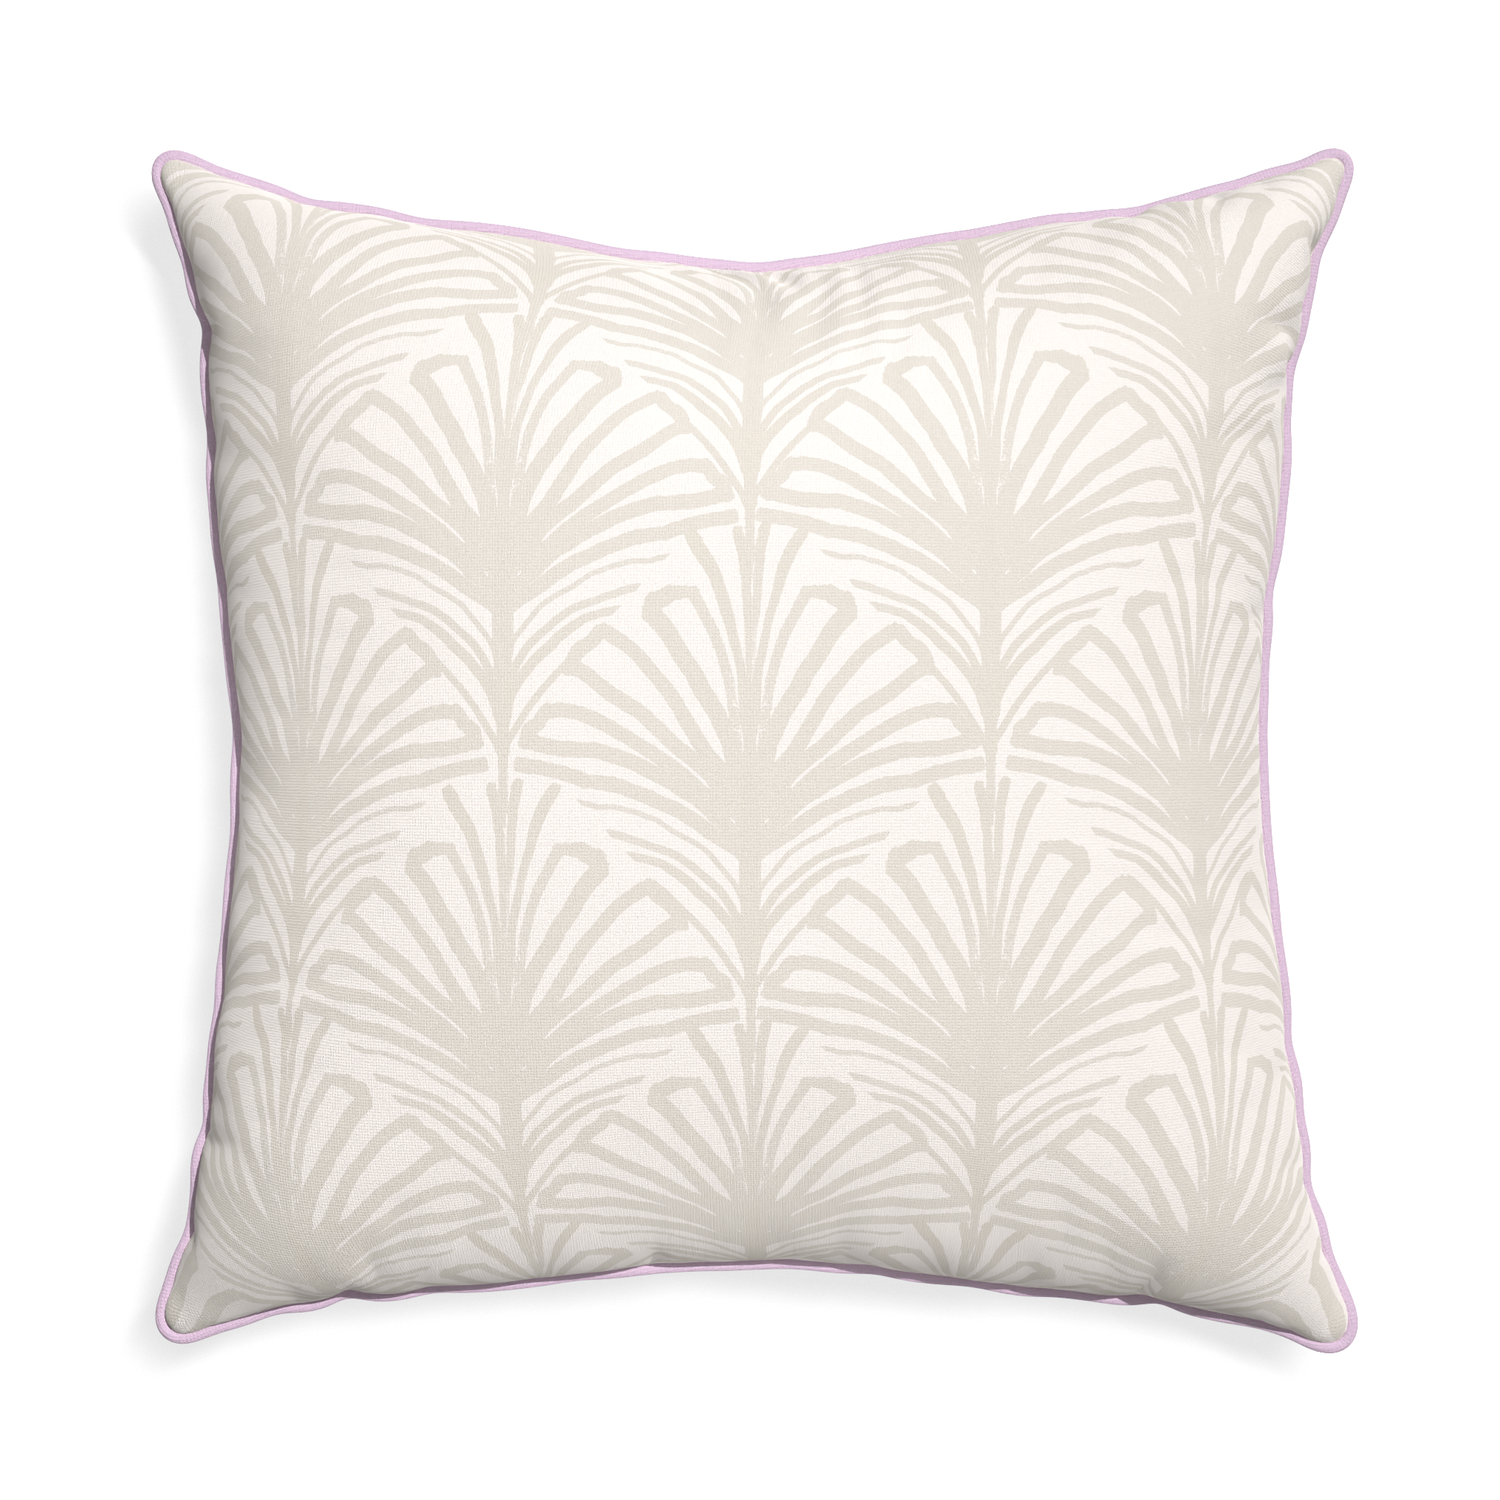 Euro-sham suzy sand custom pillow with l piping on white background